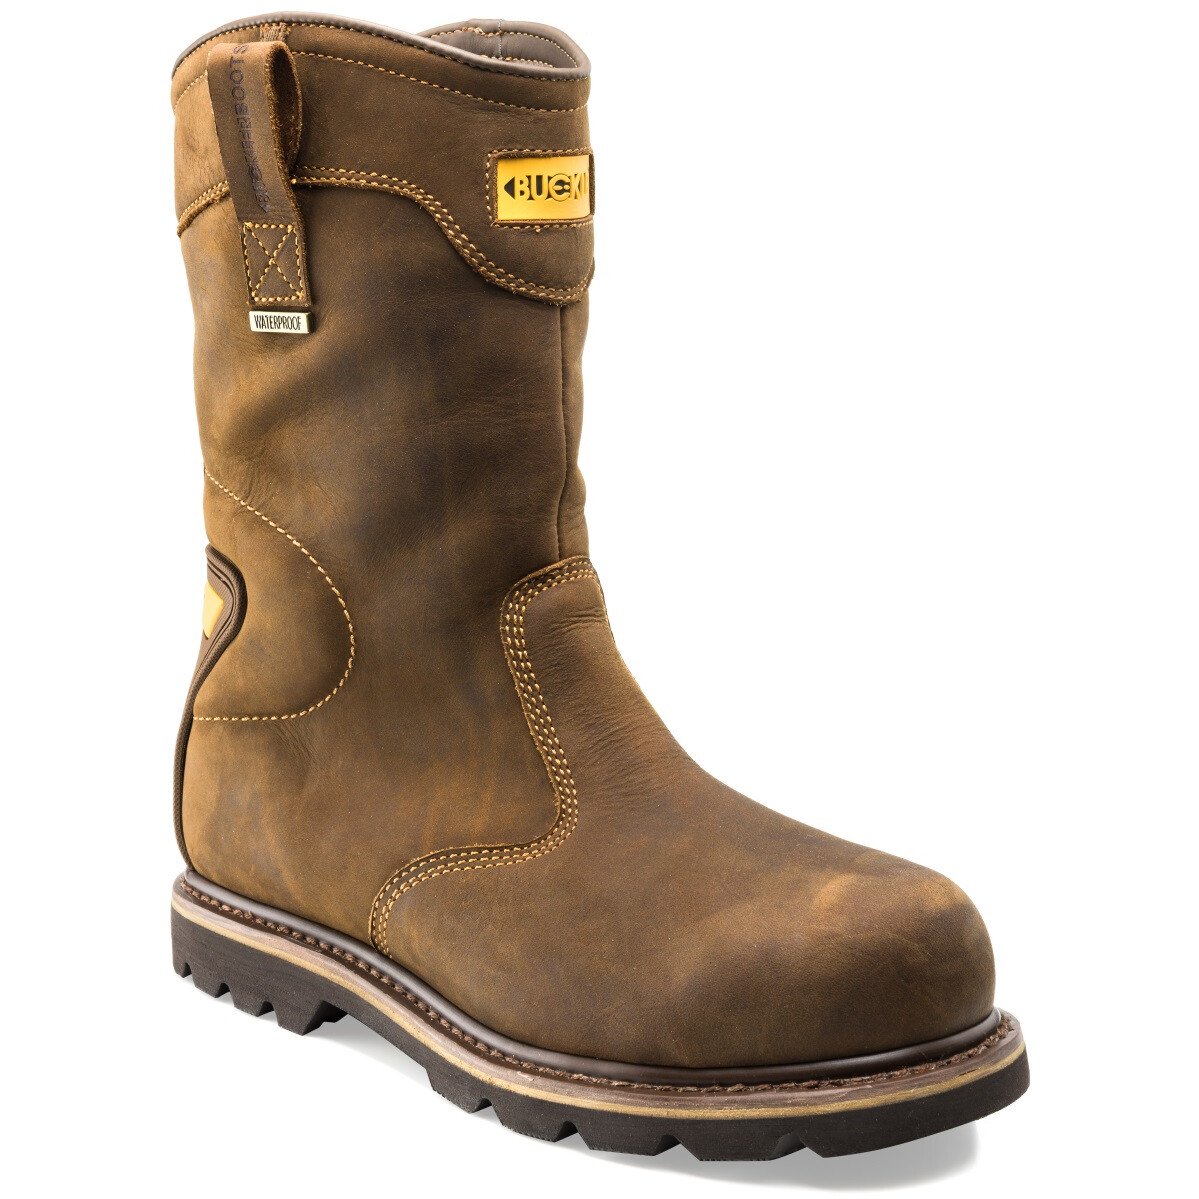 Buckbootz B701SMWP Hard as Nails Brown Safety Rigger Boot S3 HRO WRU ...